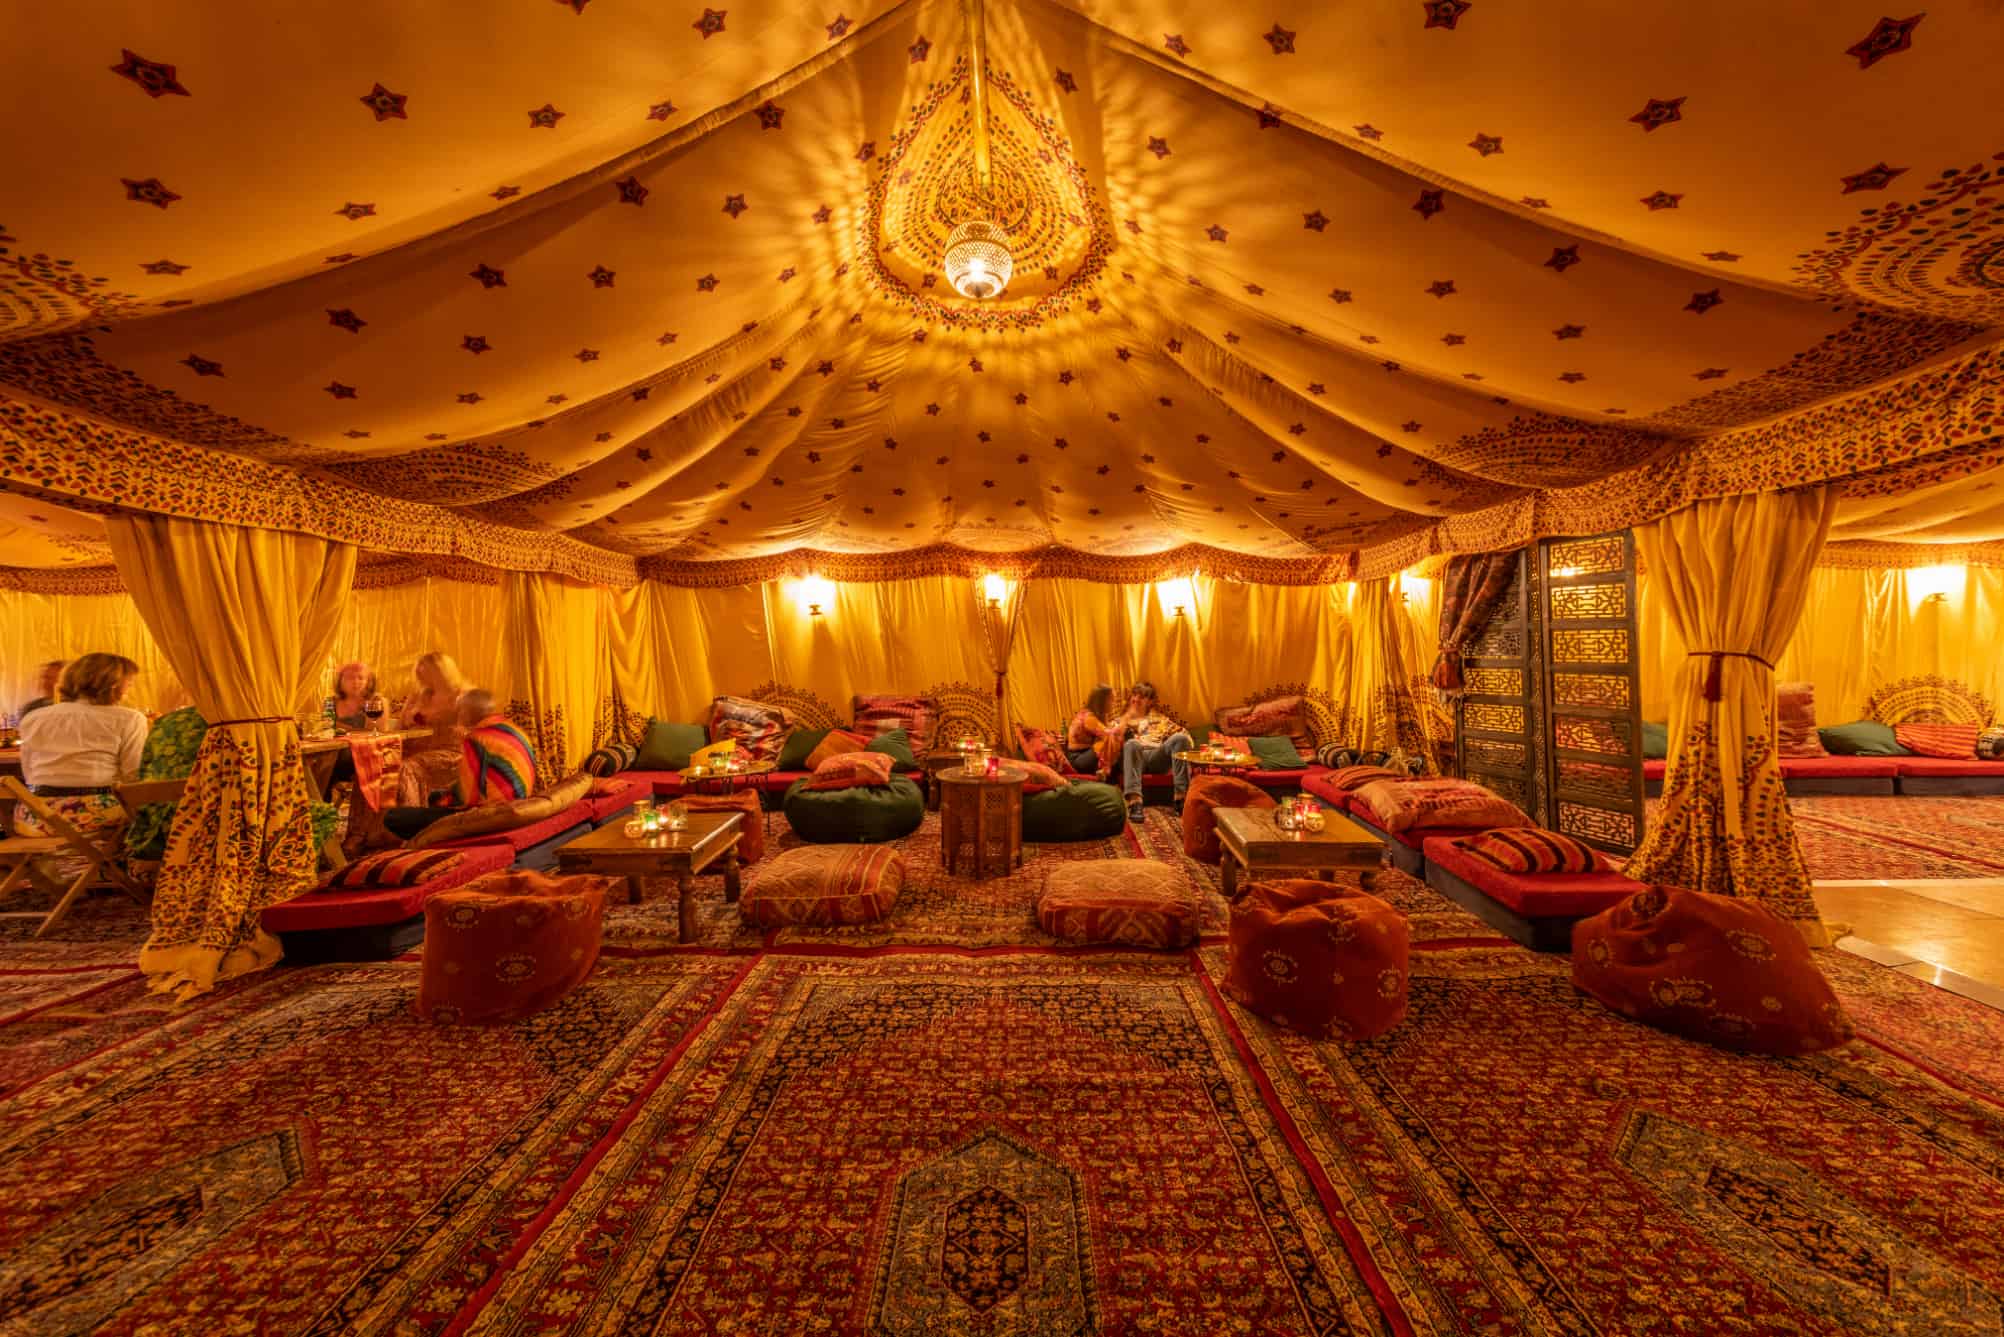 Inside an Arabian tent with low seating